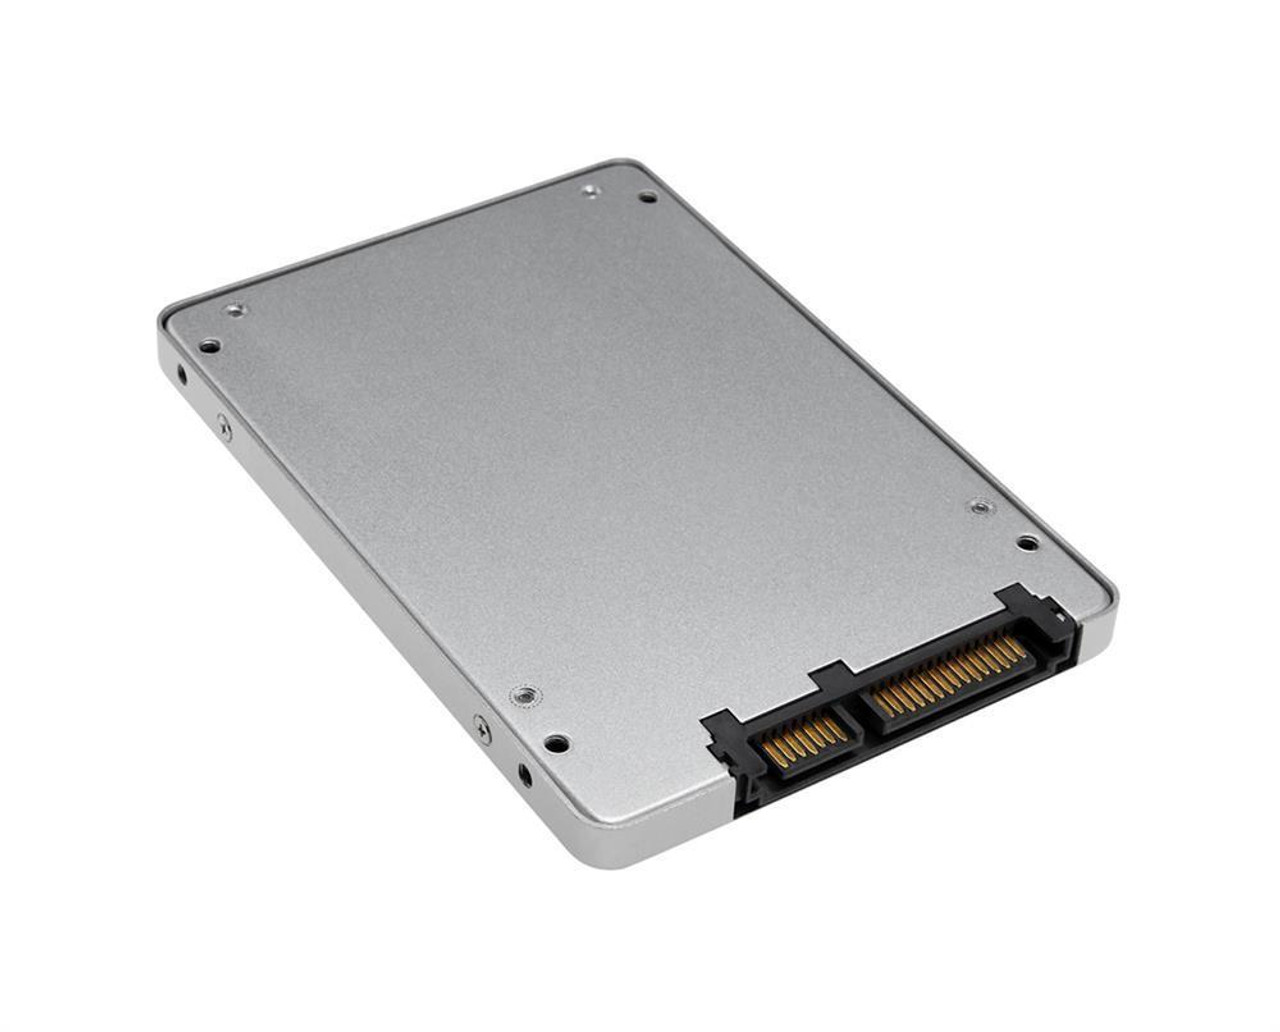 03B0100020400 ASUS 256GB SATA 6Gbps 2.5-inch Internal Solid State Drive (SSD)